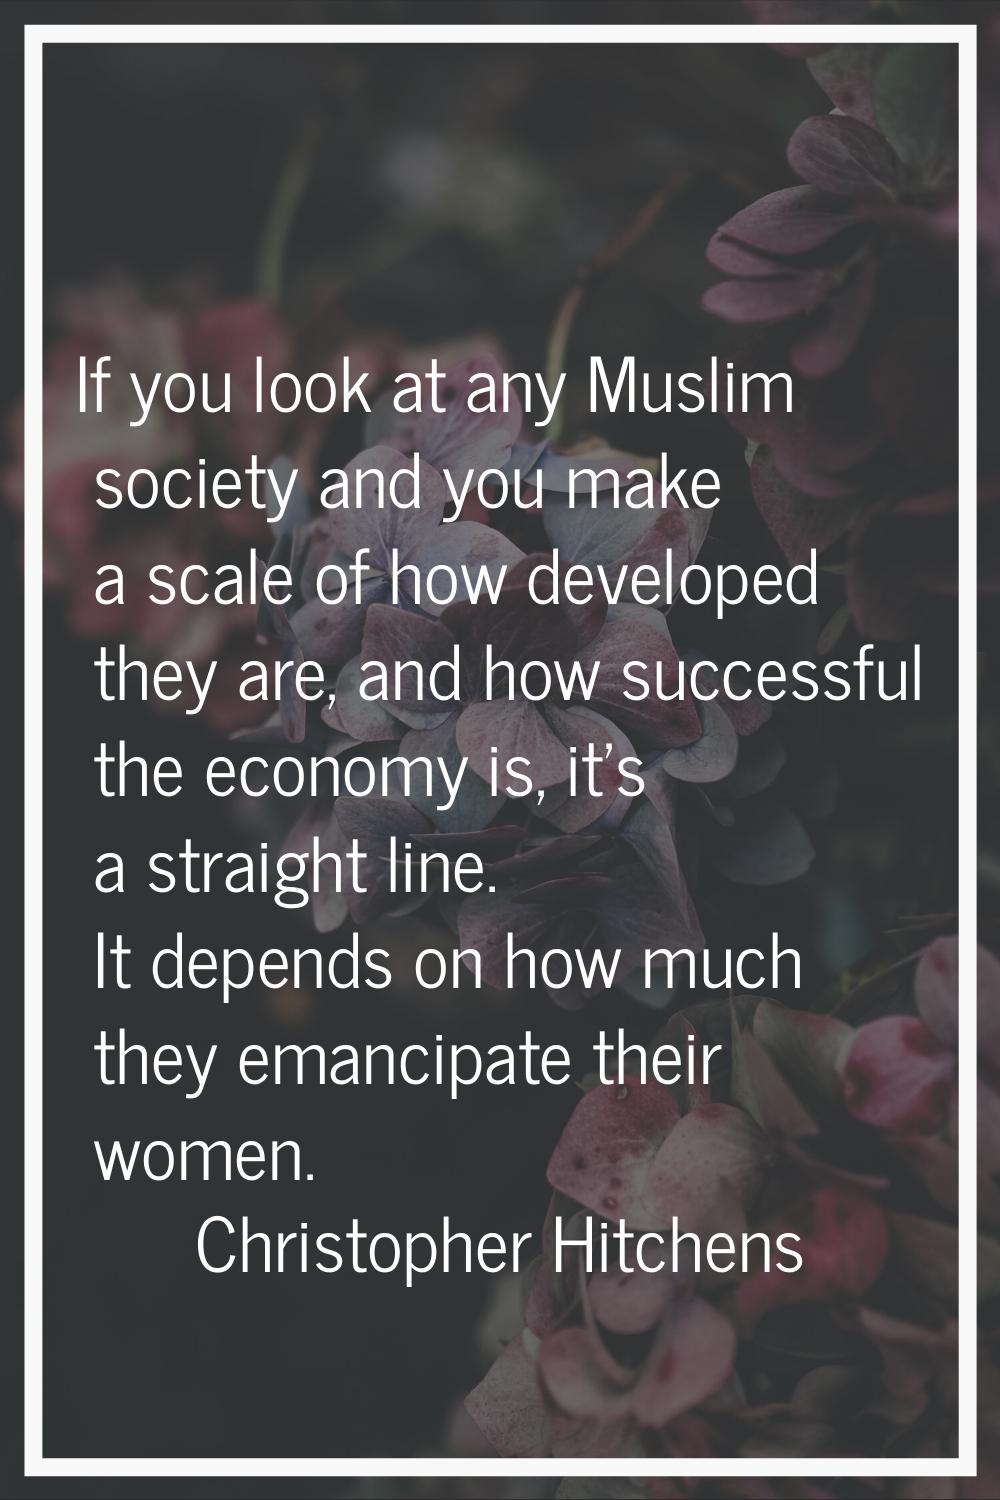 If you look at any Muslim society and you make a scale of how developed they are, and how successfu